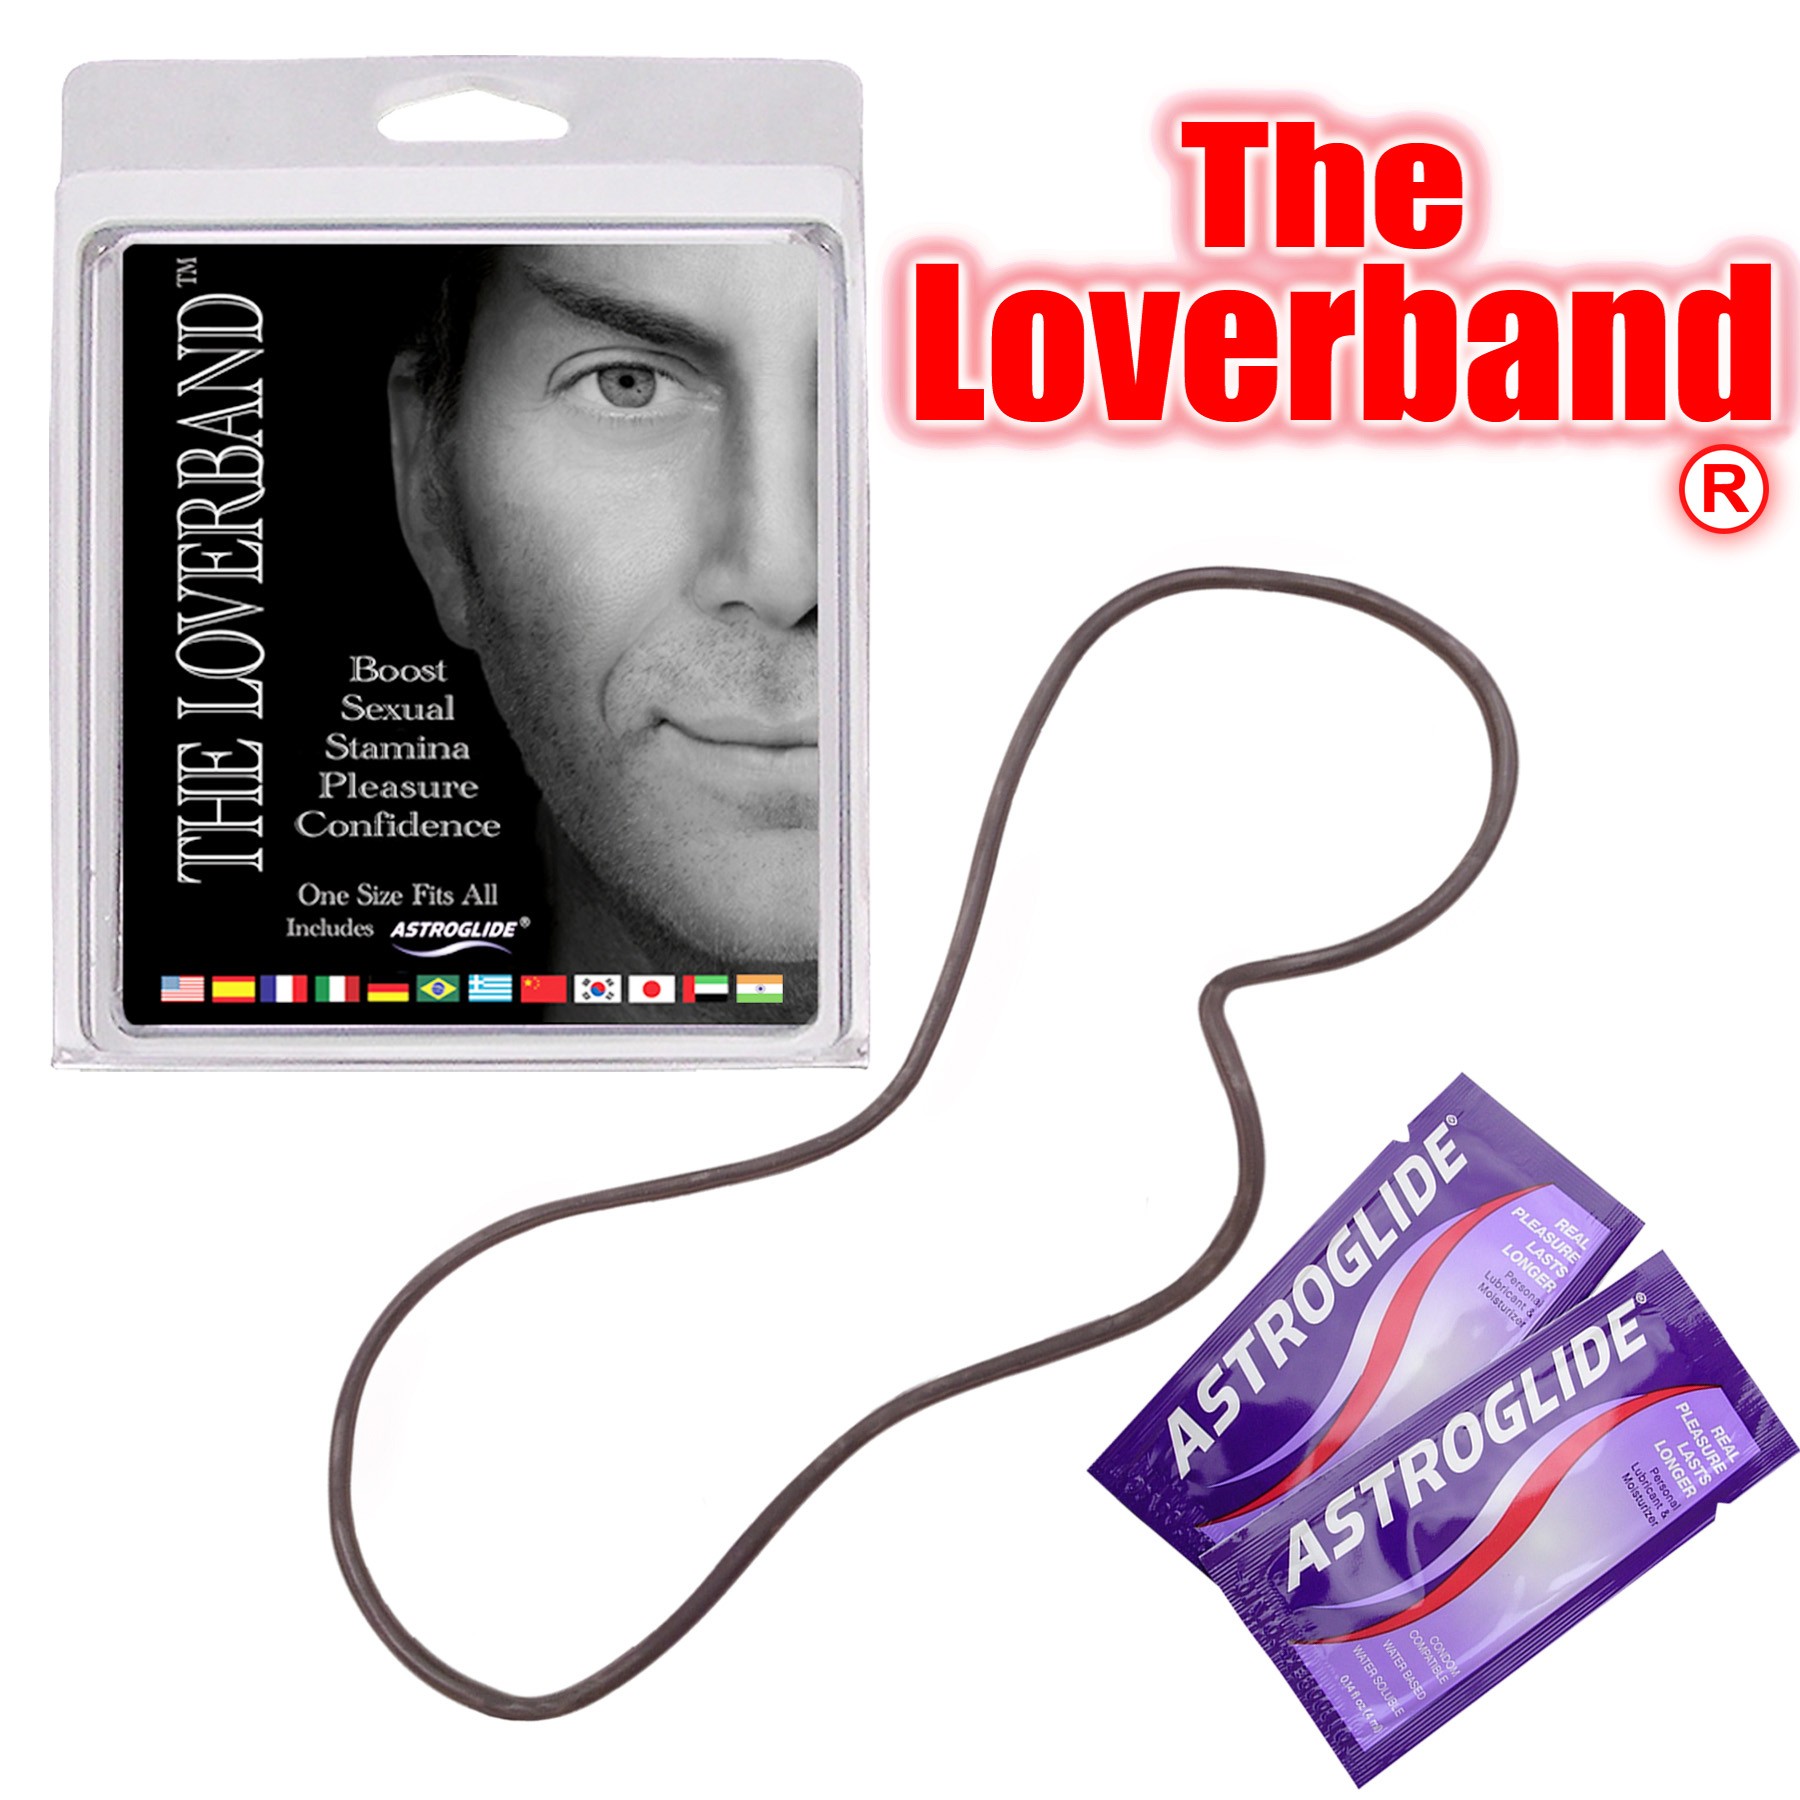 The Loverband® Device